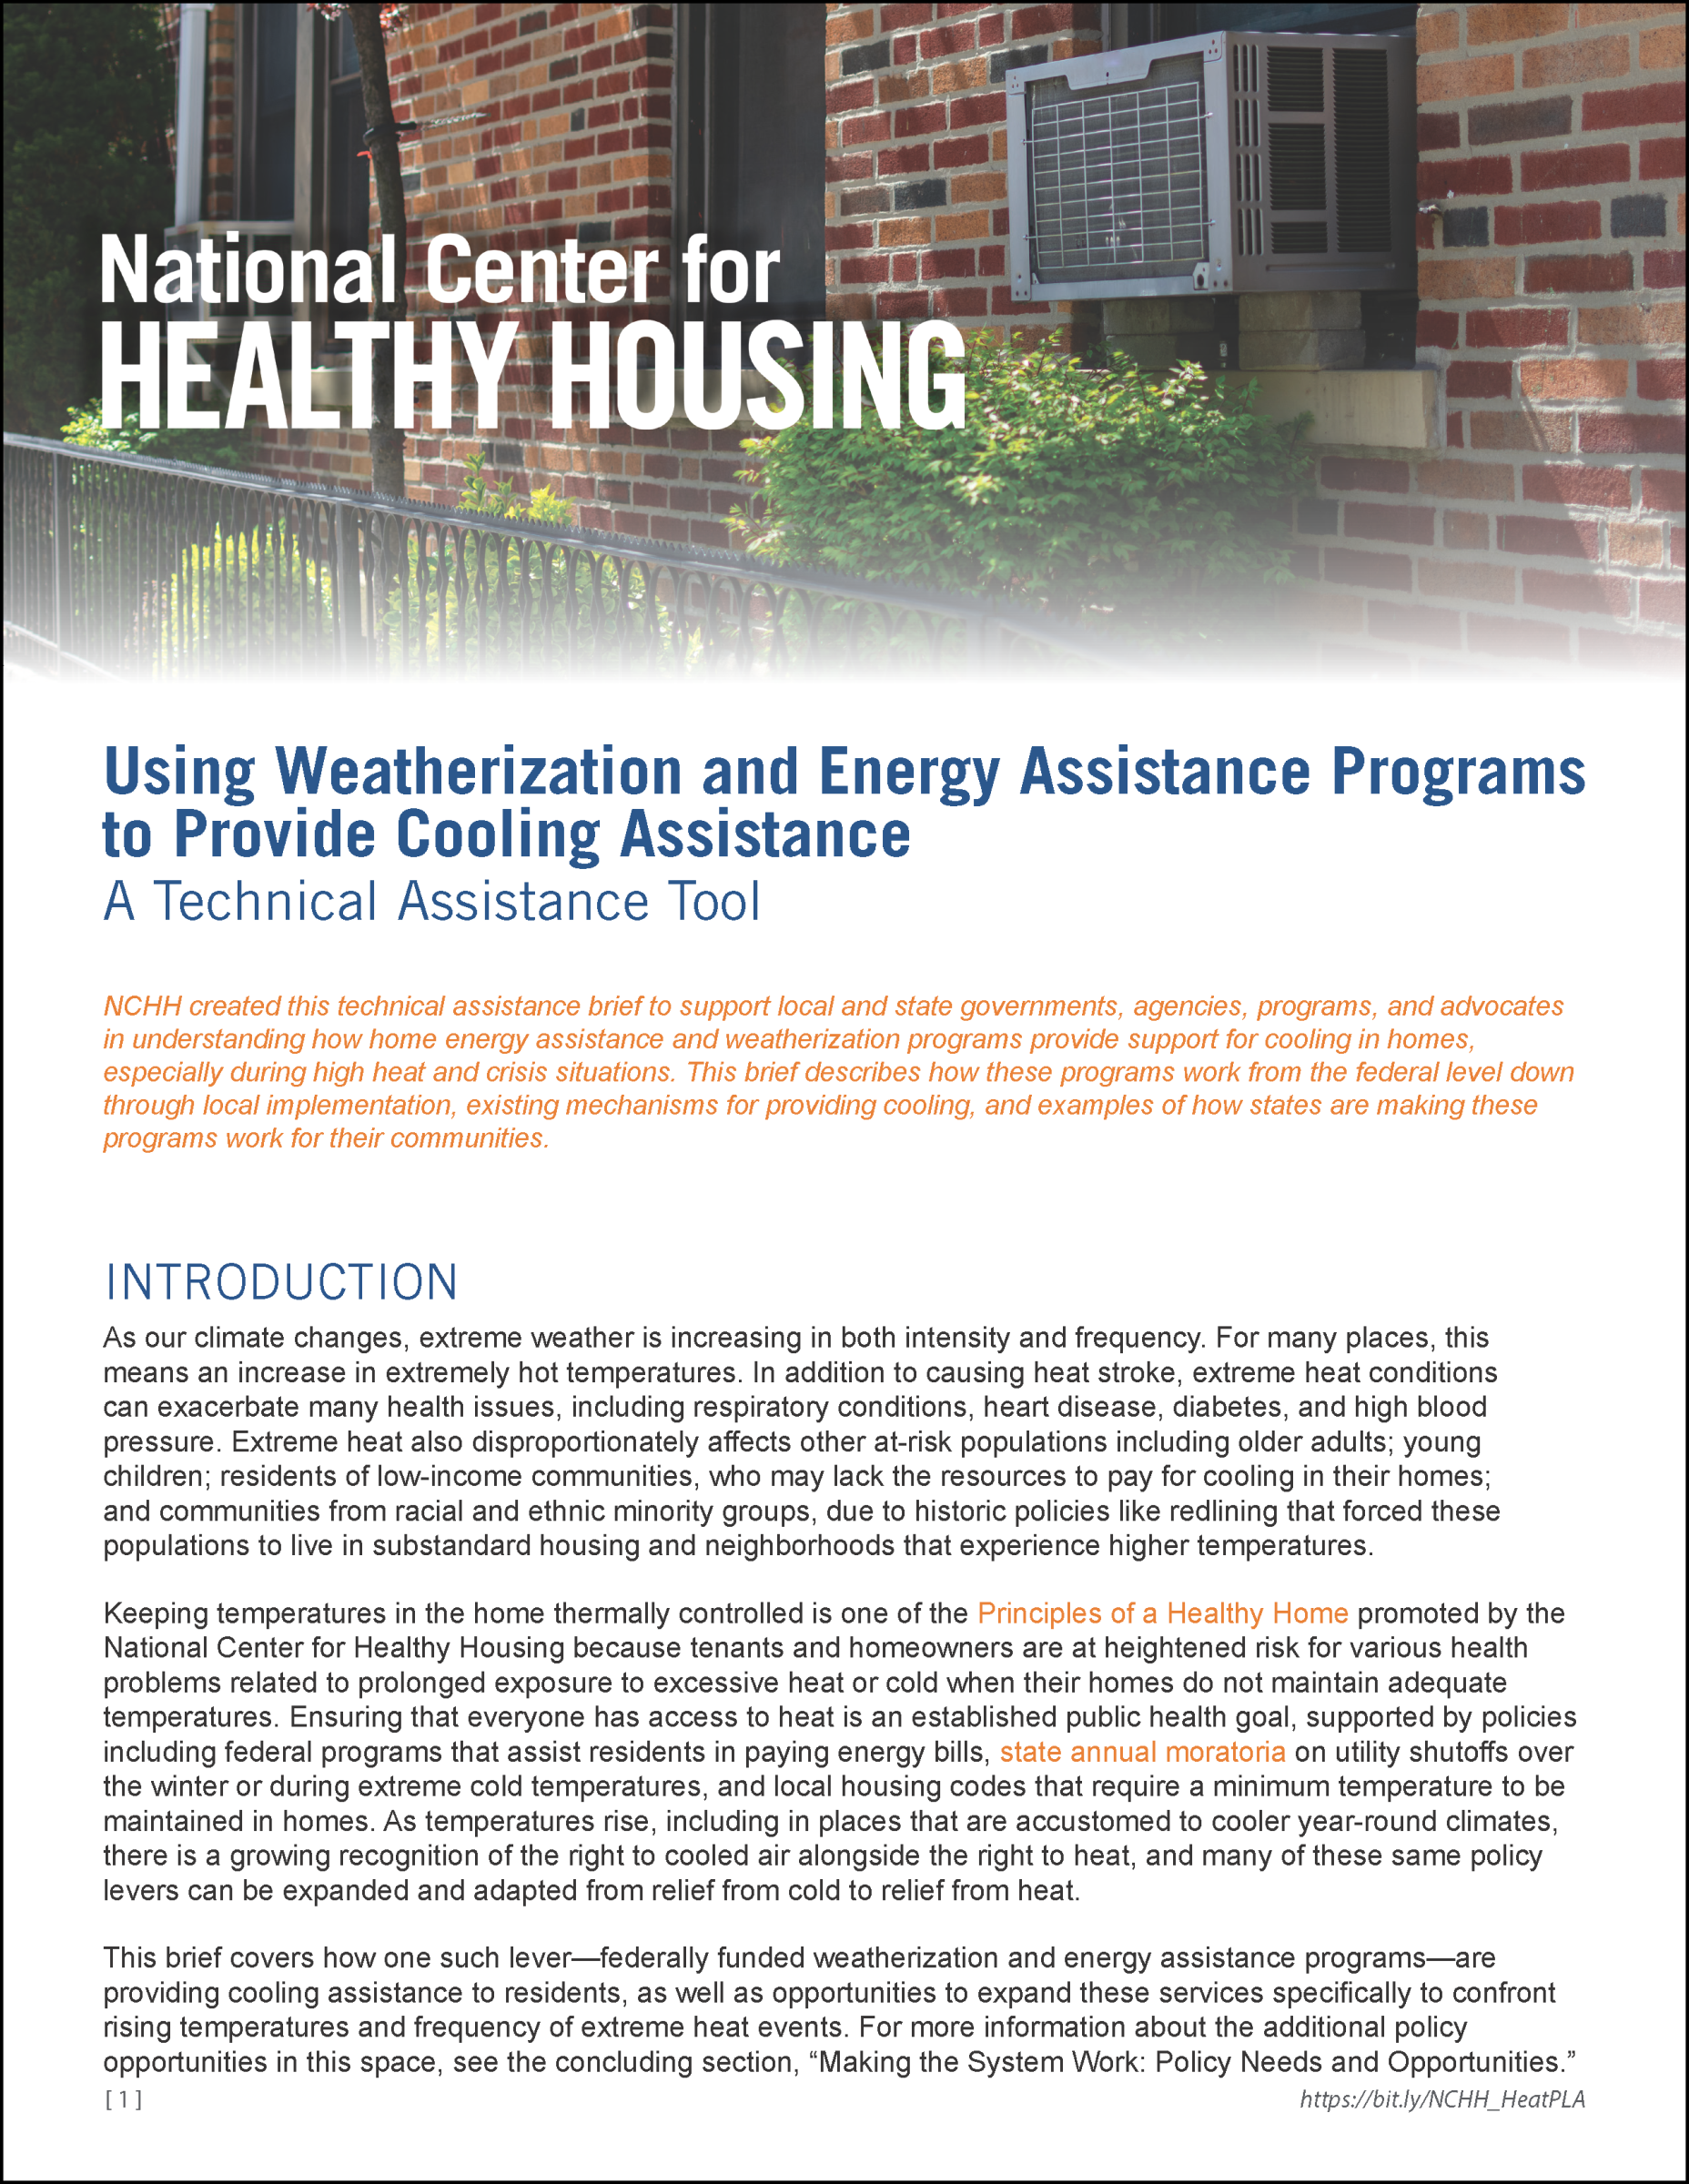 Using Weatherization and Energy Assistance Programs to Provide Cooling Assistance